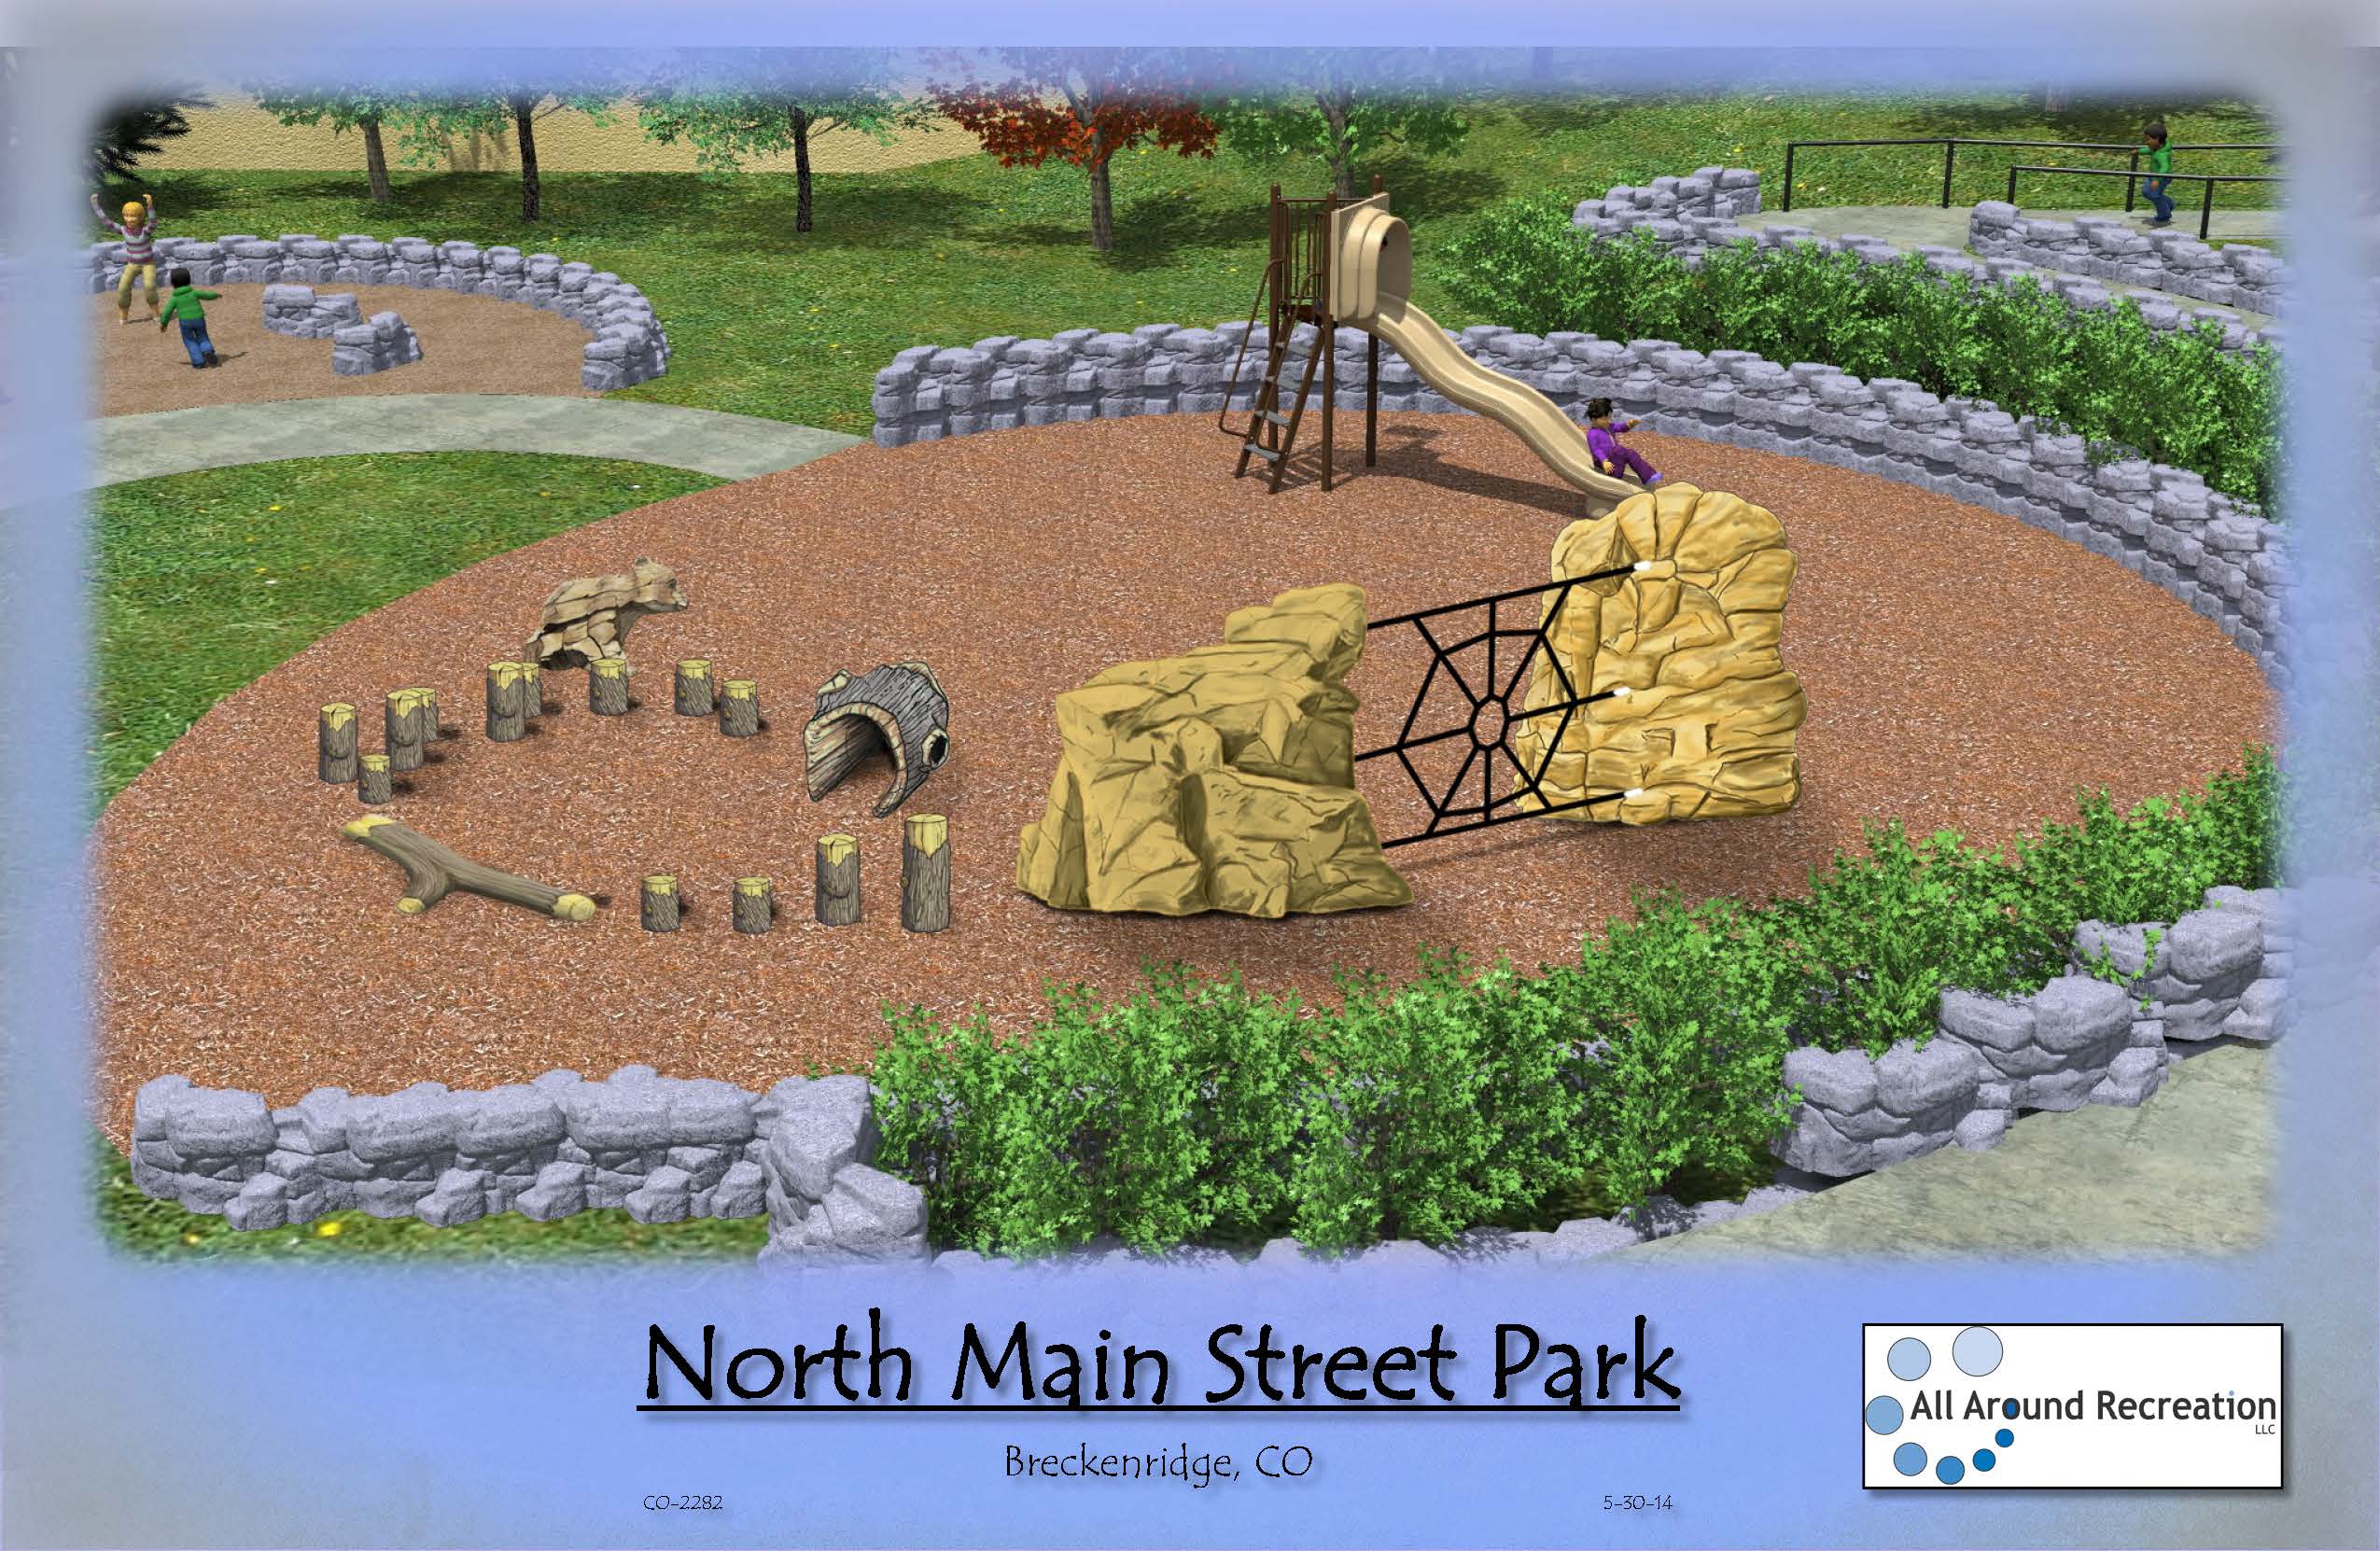 Name the new park